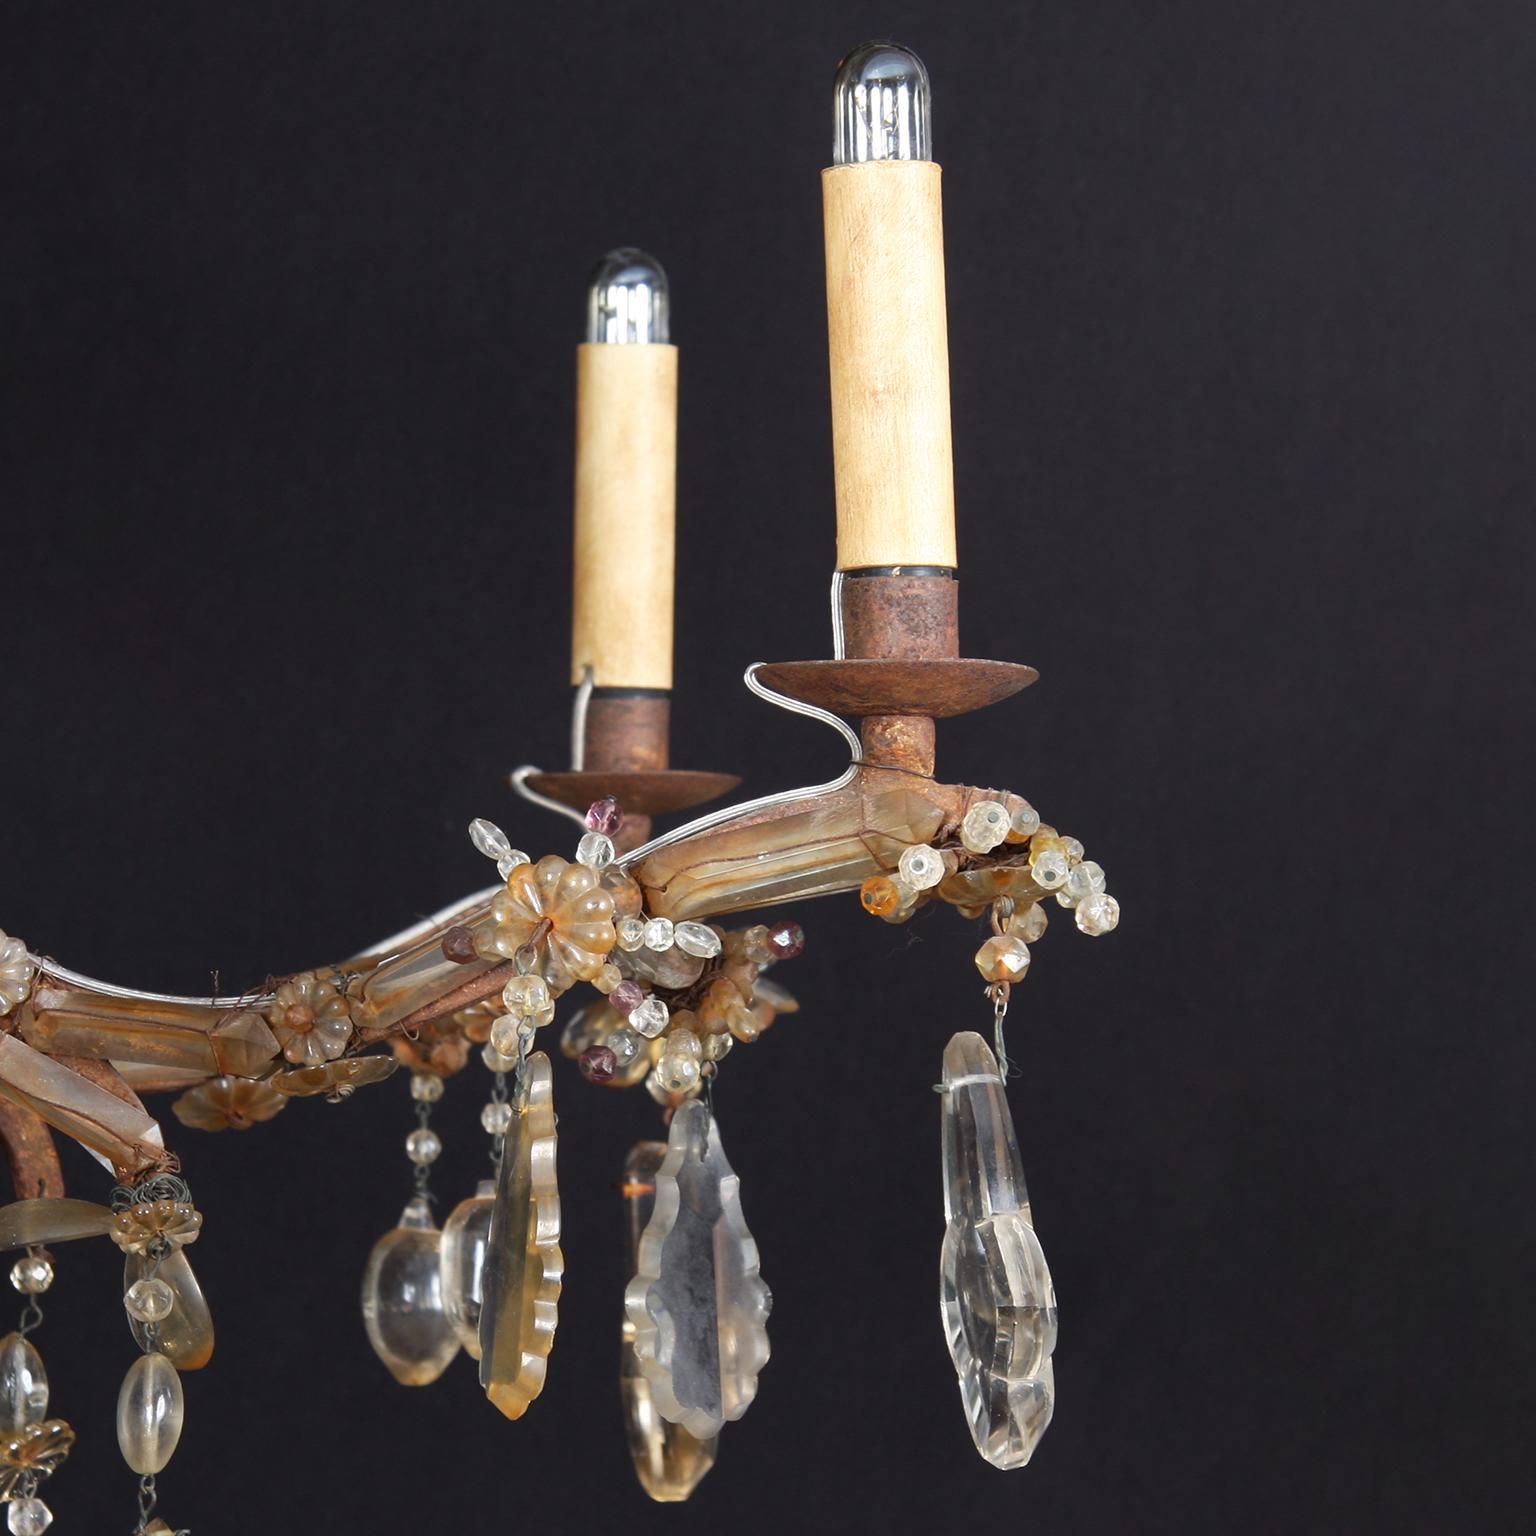 Large 19th Century Early Bagues Chandelier, Paris im Zustand „Gut“ im Angebot in London, GB